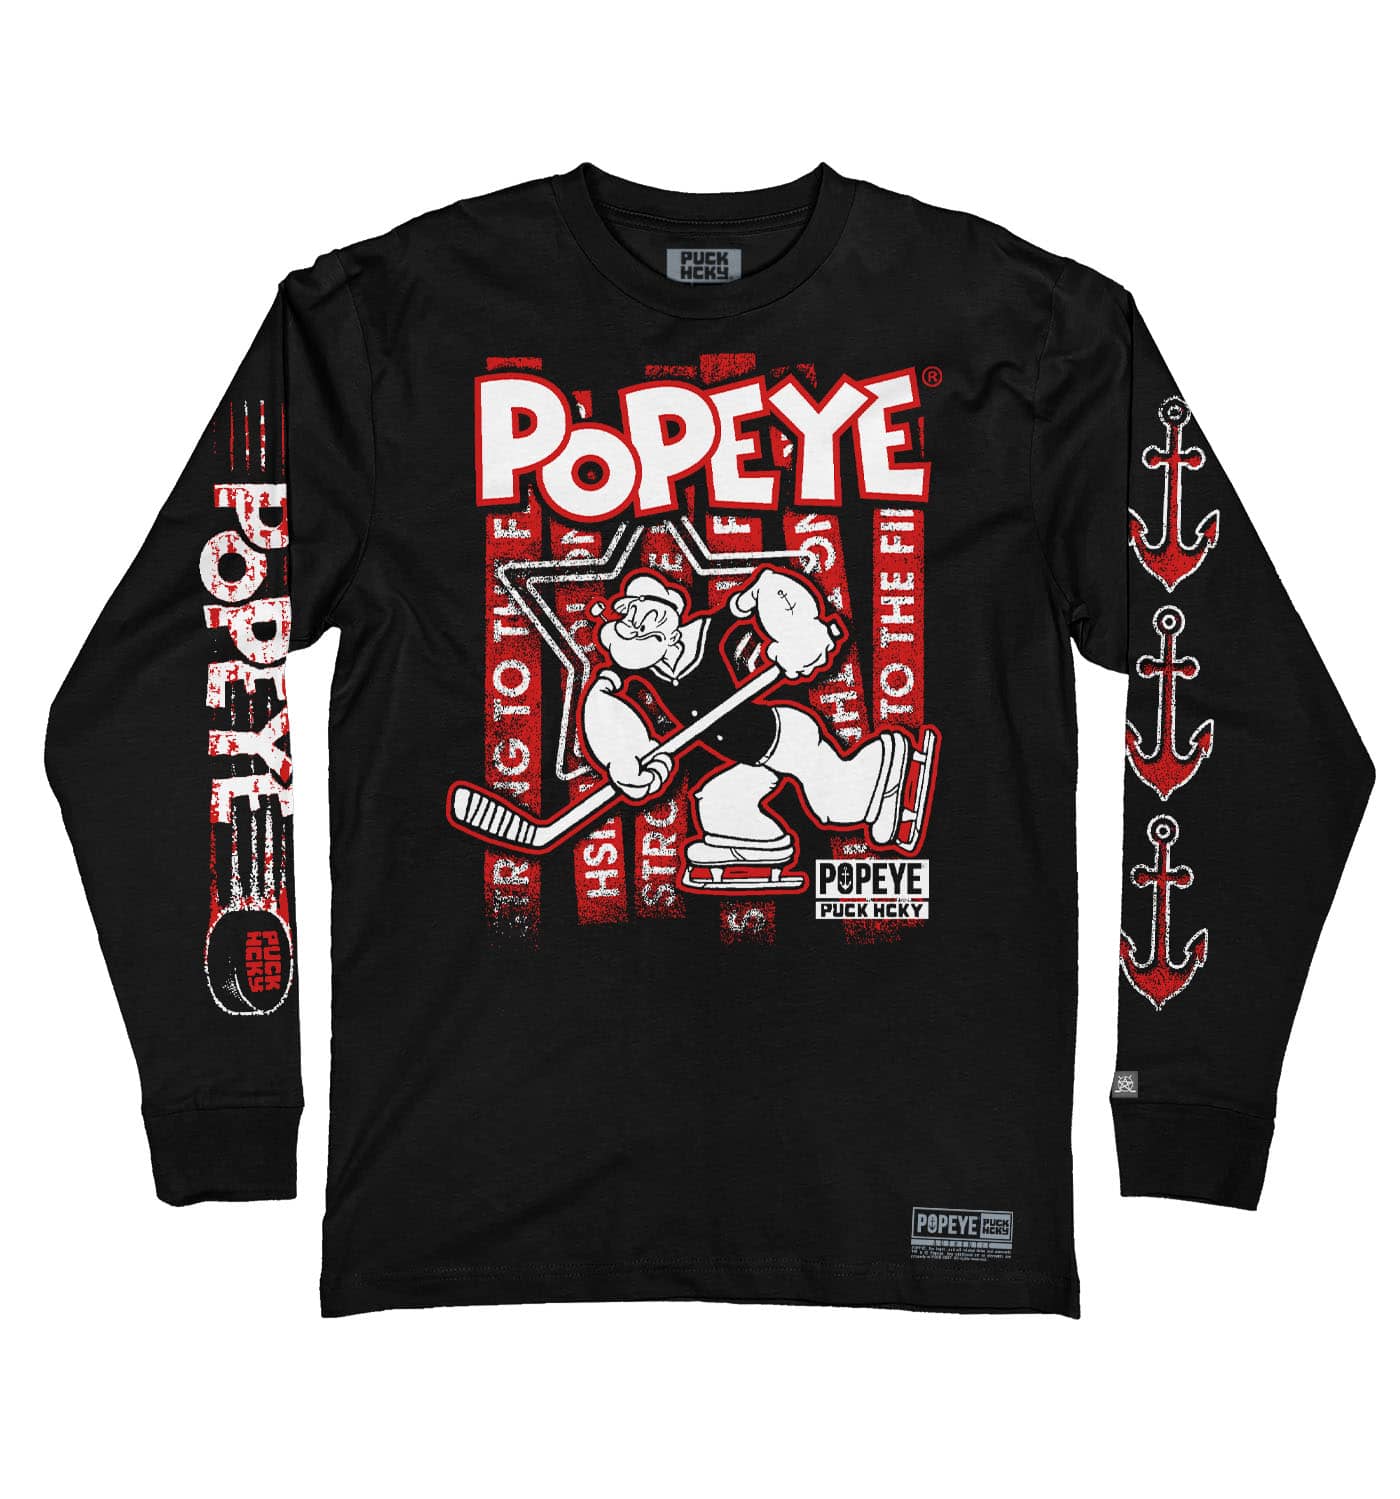 POPEYE 'STRONG TO THE FINISH' long sleeve hockey t-shirt in black front view